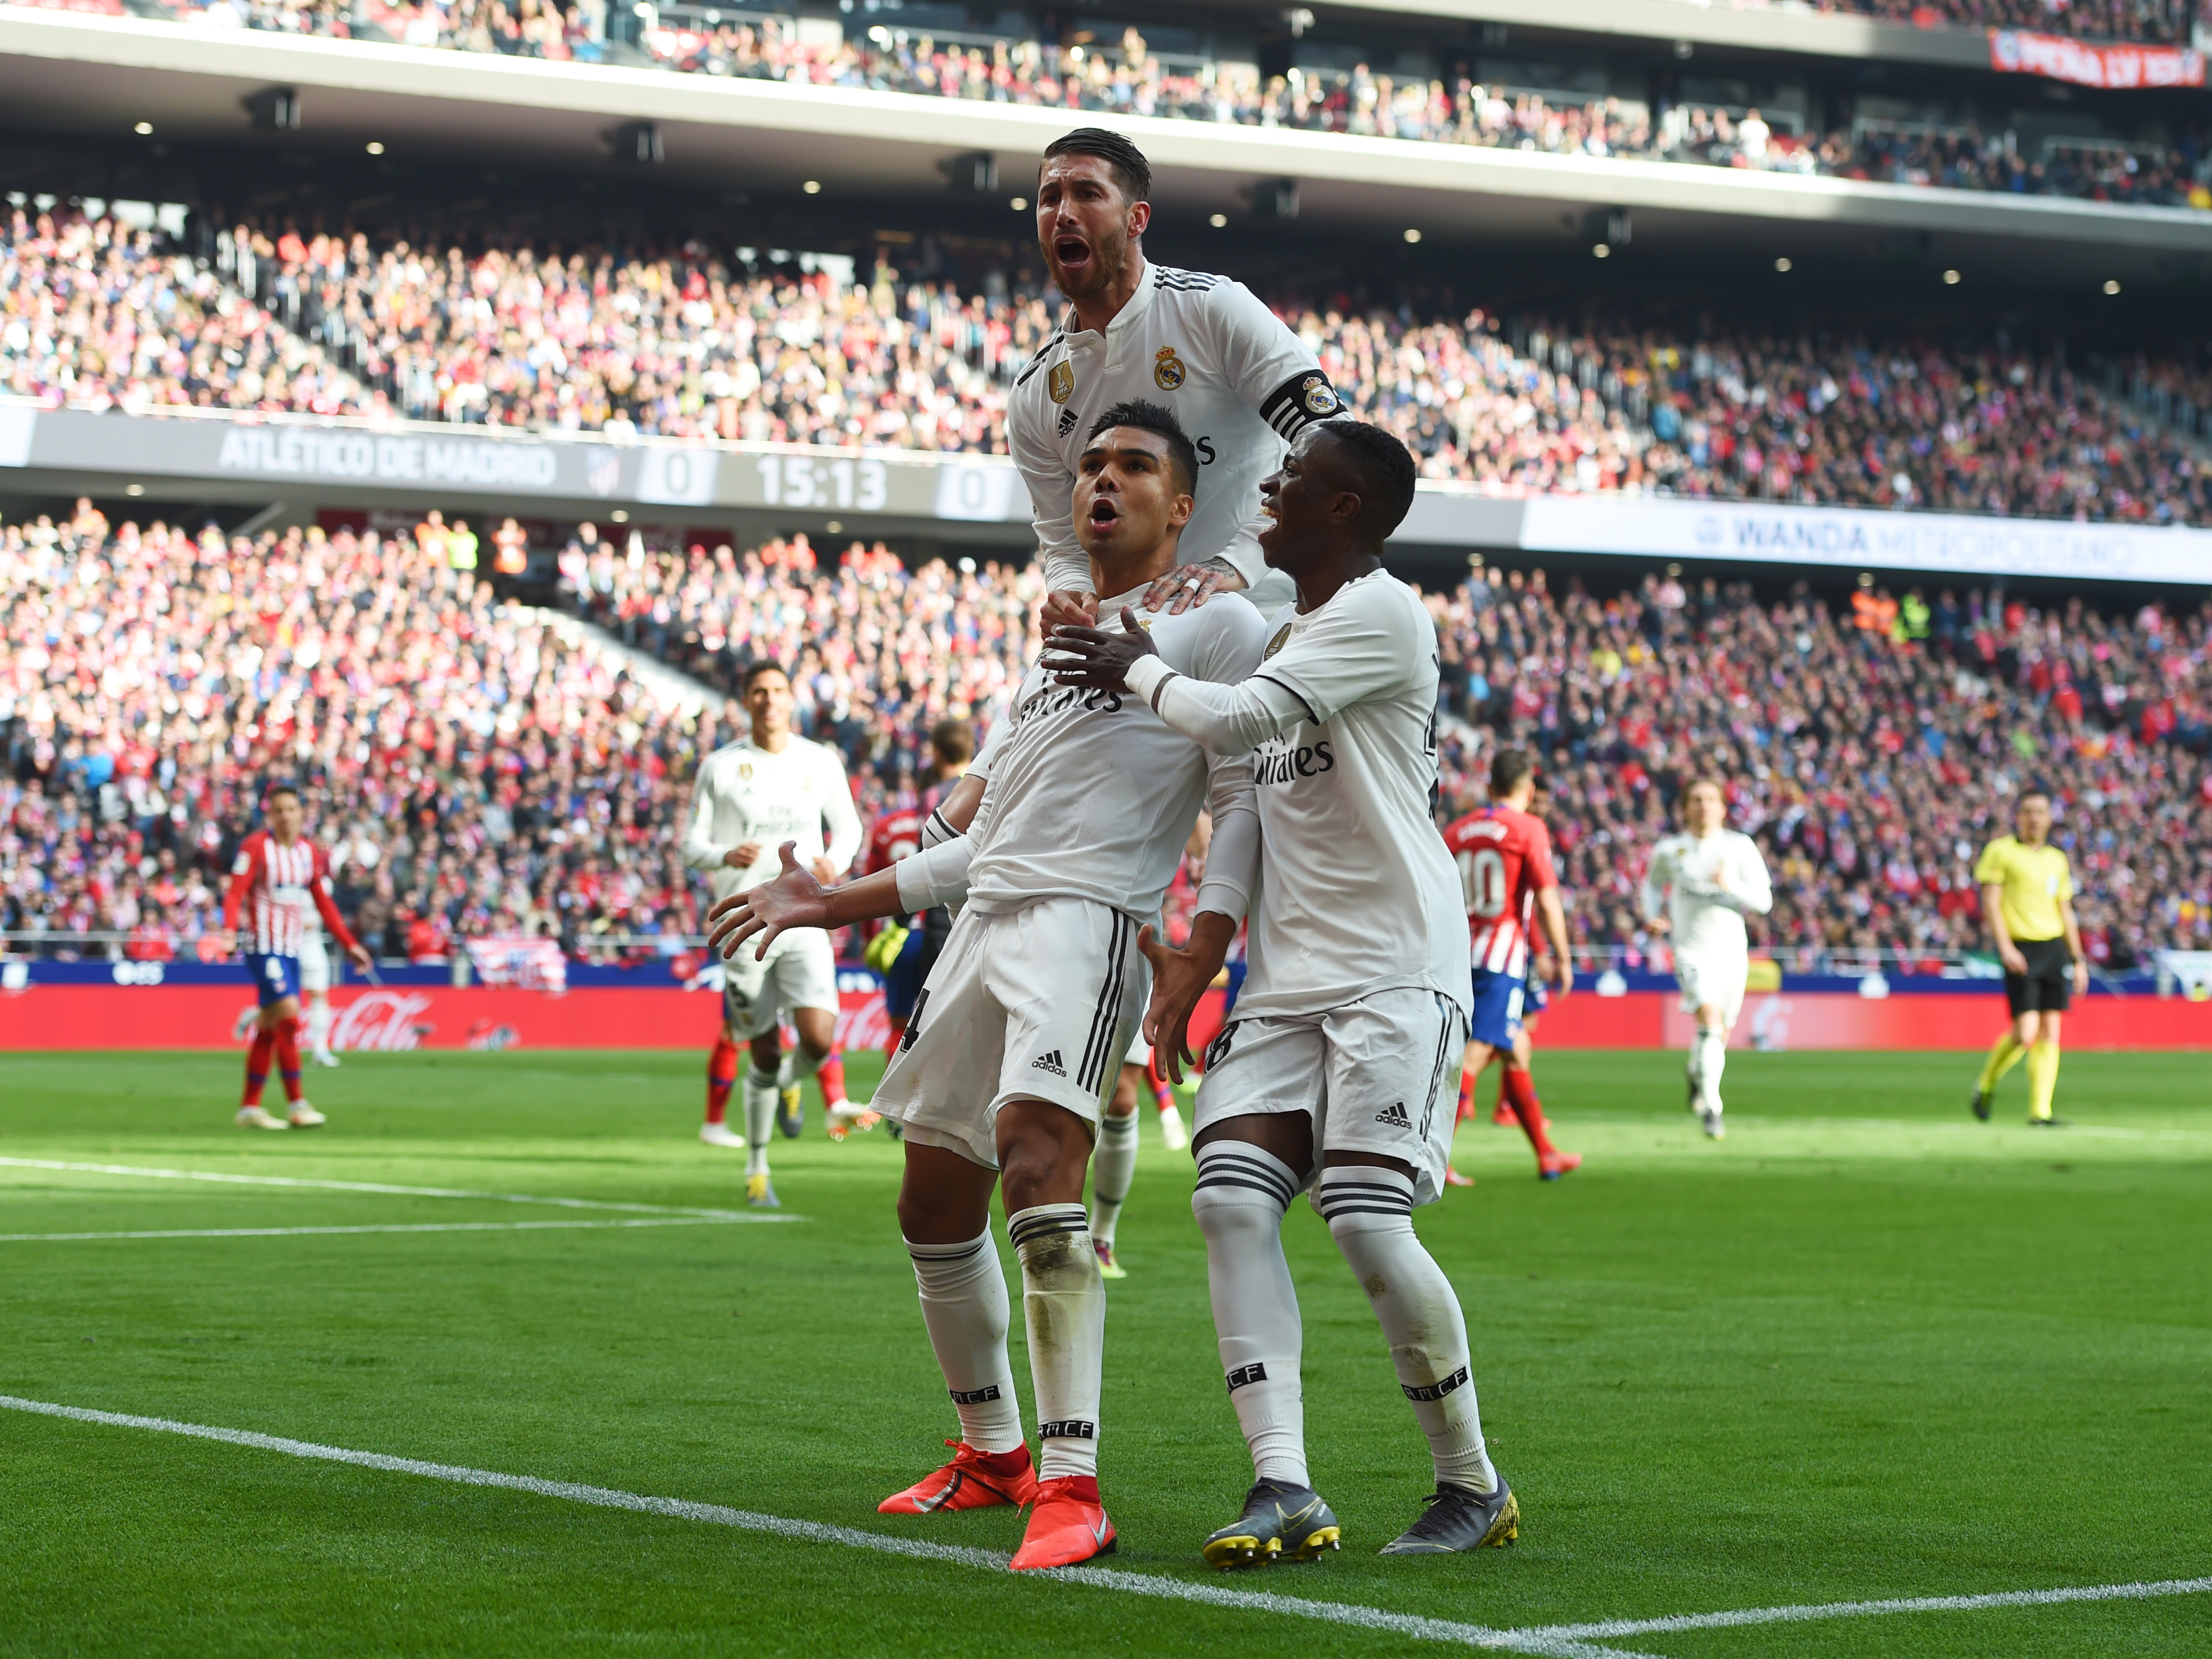 MADRID, SPAIN - FEBRUARY 09:   Casemiro of Real Madrid (14) celebrates after scoring his team's first goal with Sergio Ramos and Vinicius Junior during the La Liga match between Club Atletico de Madrid and Real Madrid CF at Wanda Metropolitano on February 09, 2019 in Madrid, Spain. (Photo by Denis Doyle/Getty Images)